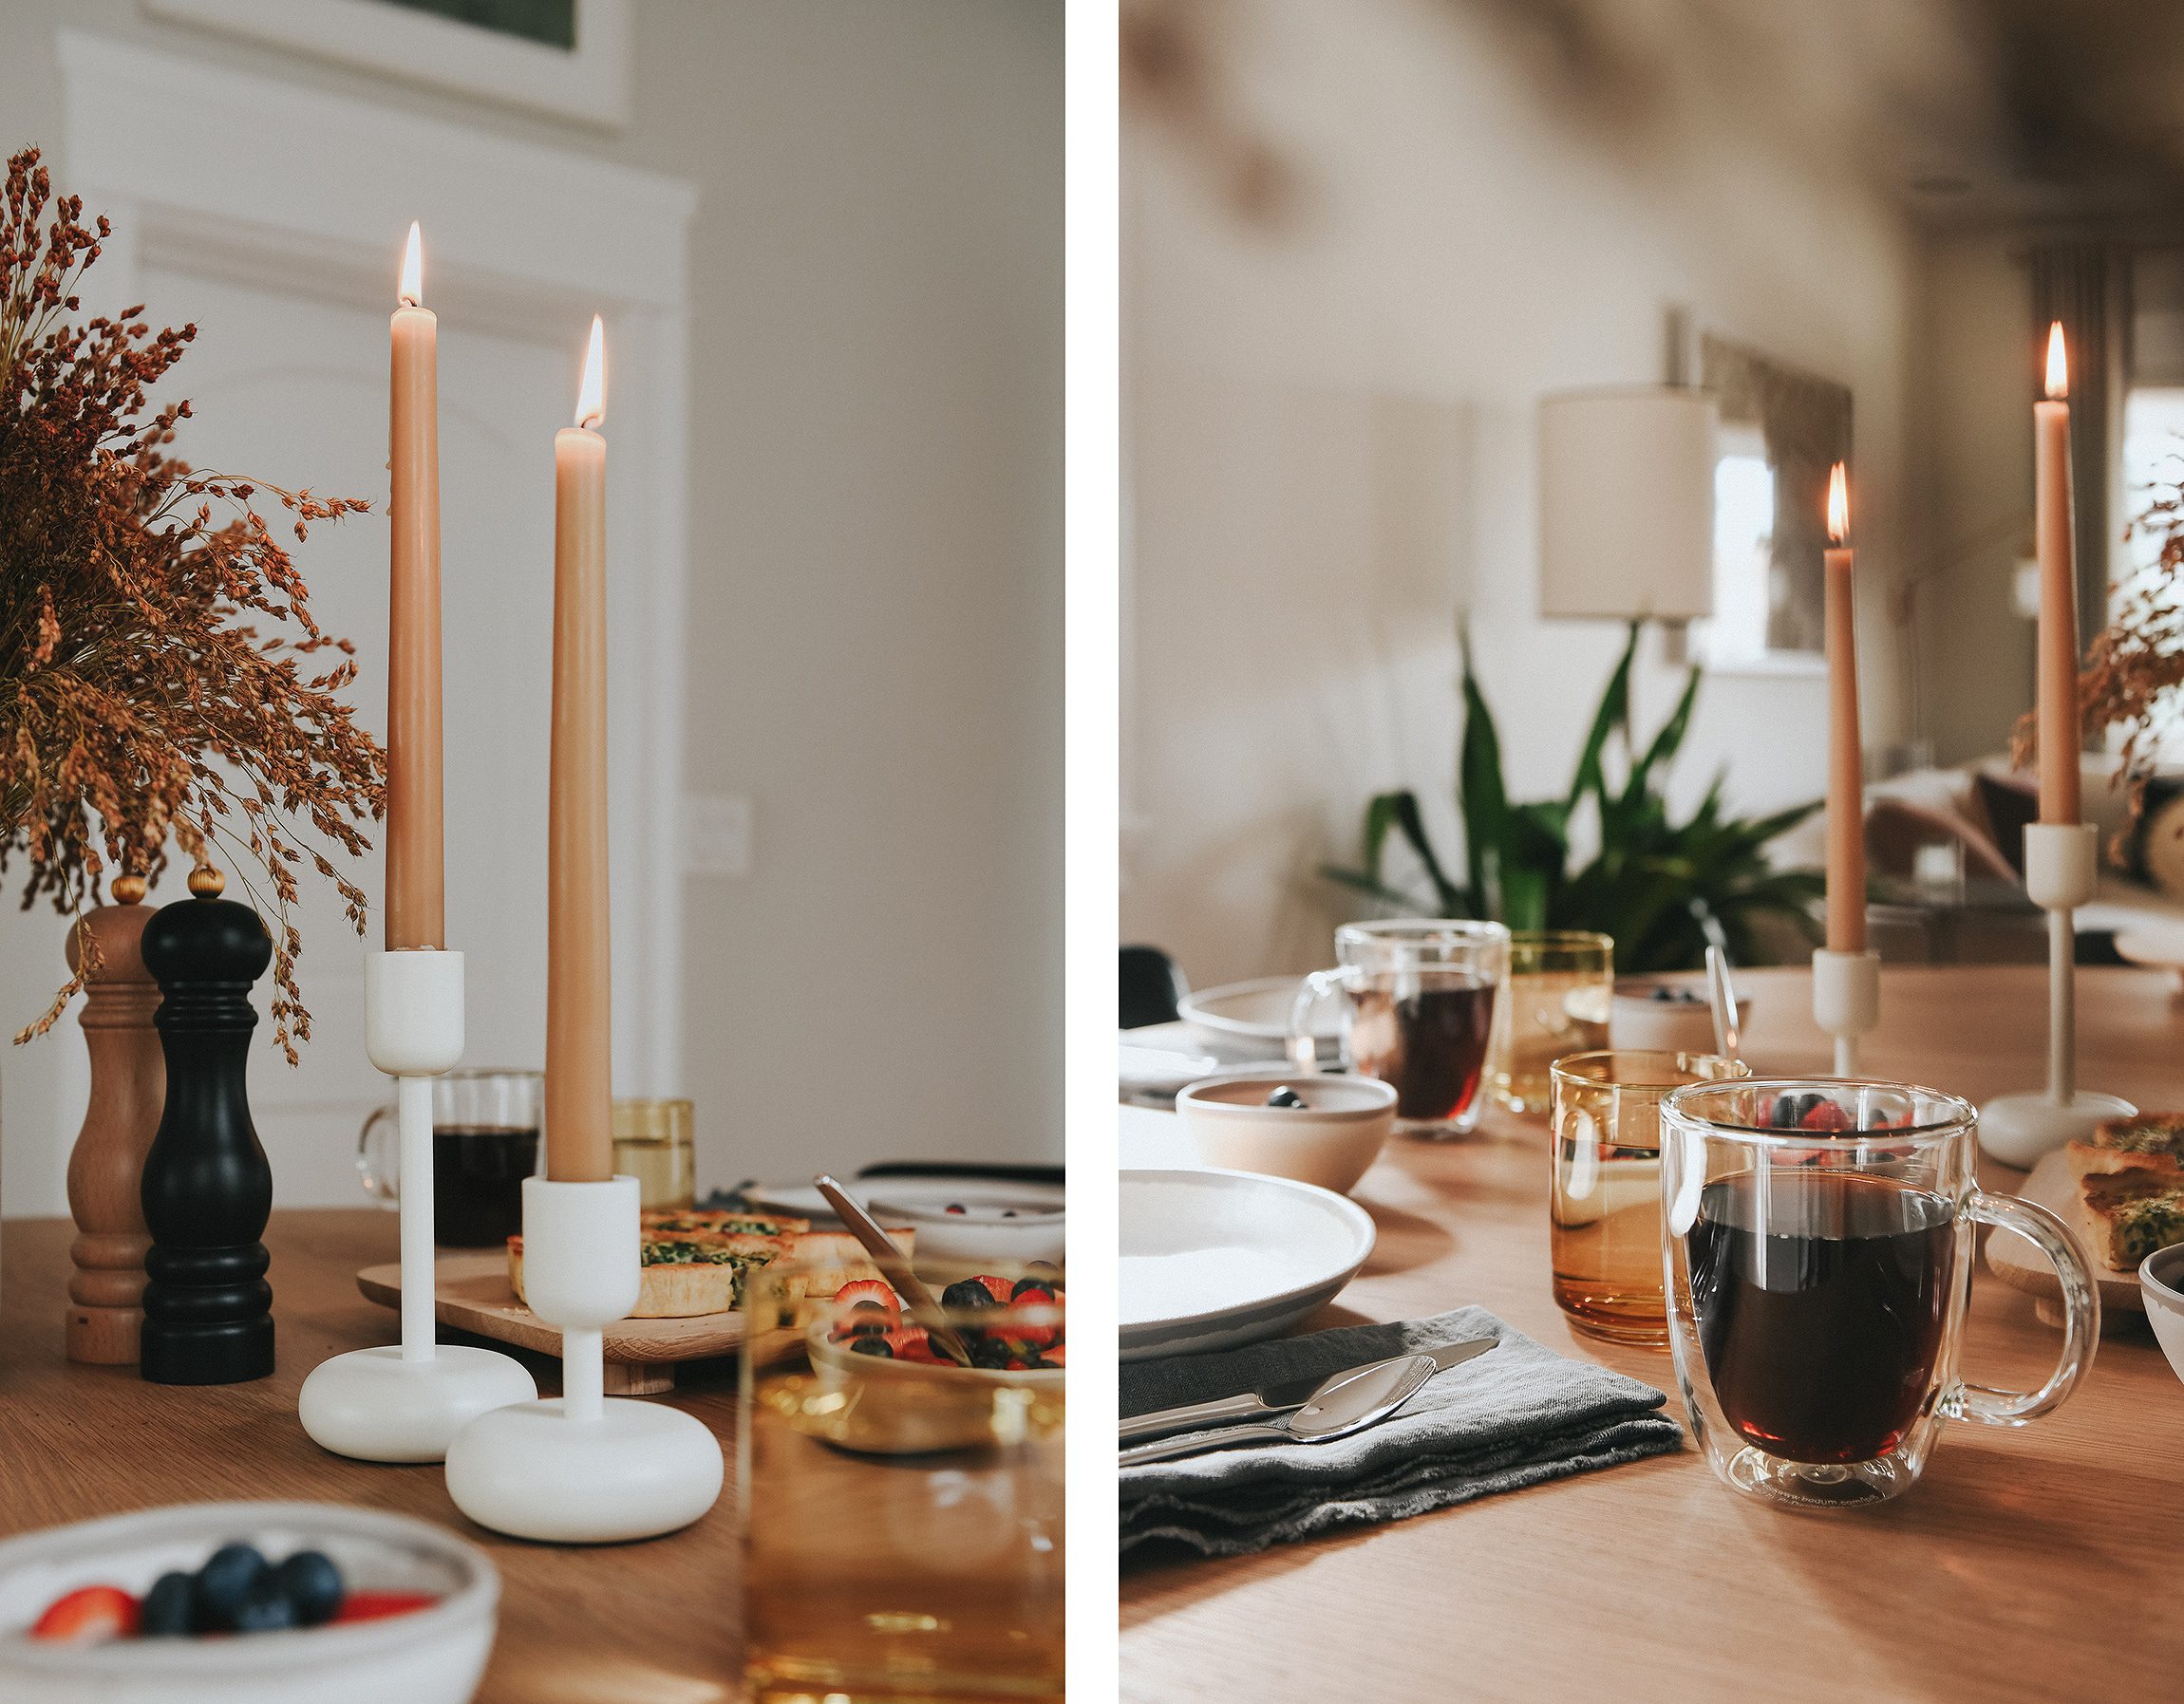 Beeswax candles, double wall glass coffee mugs and a brunch spread featuring items from AllModern | via Yellow Brick Home